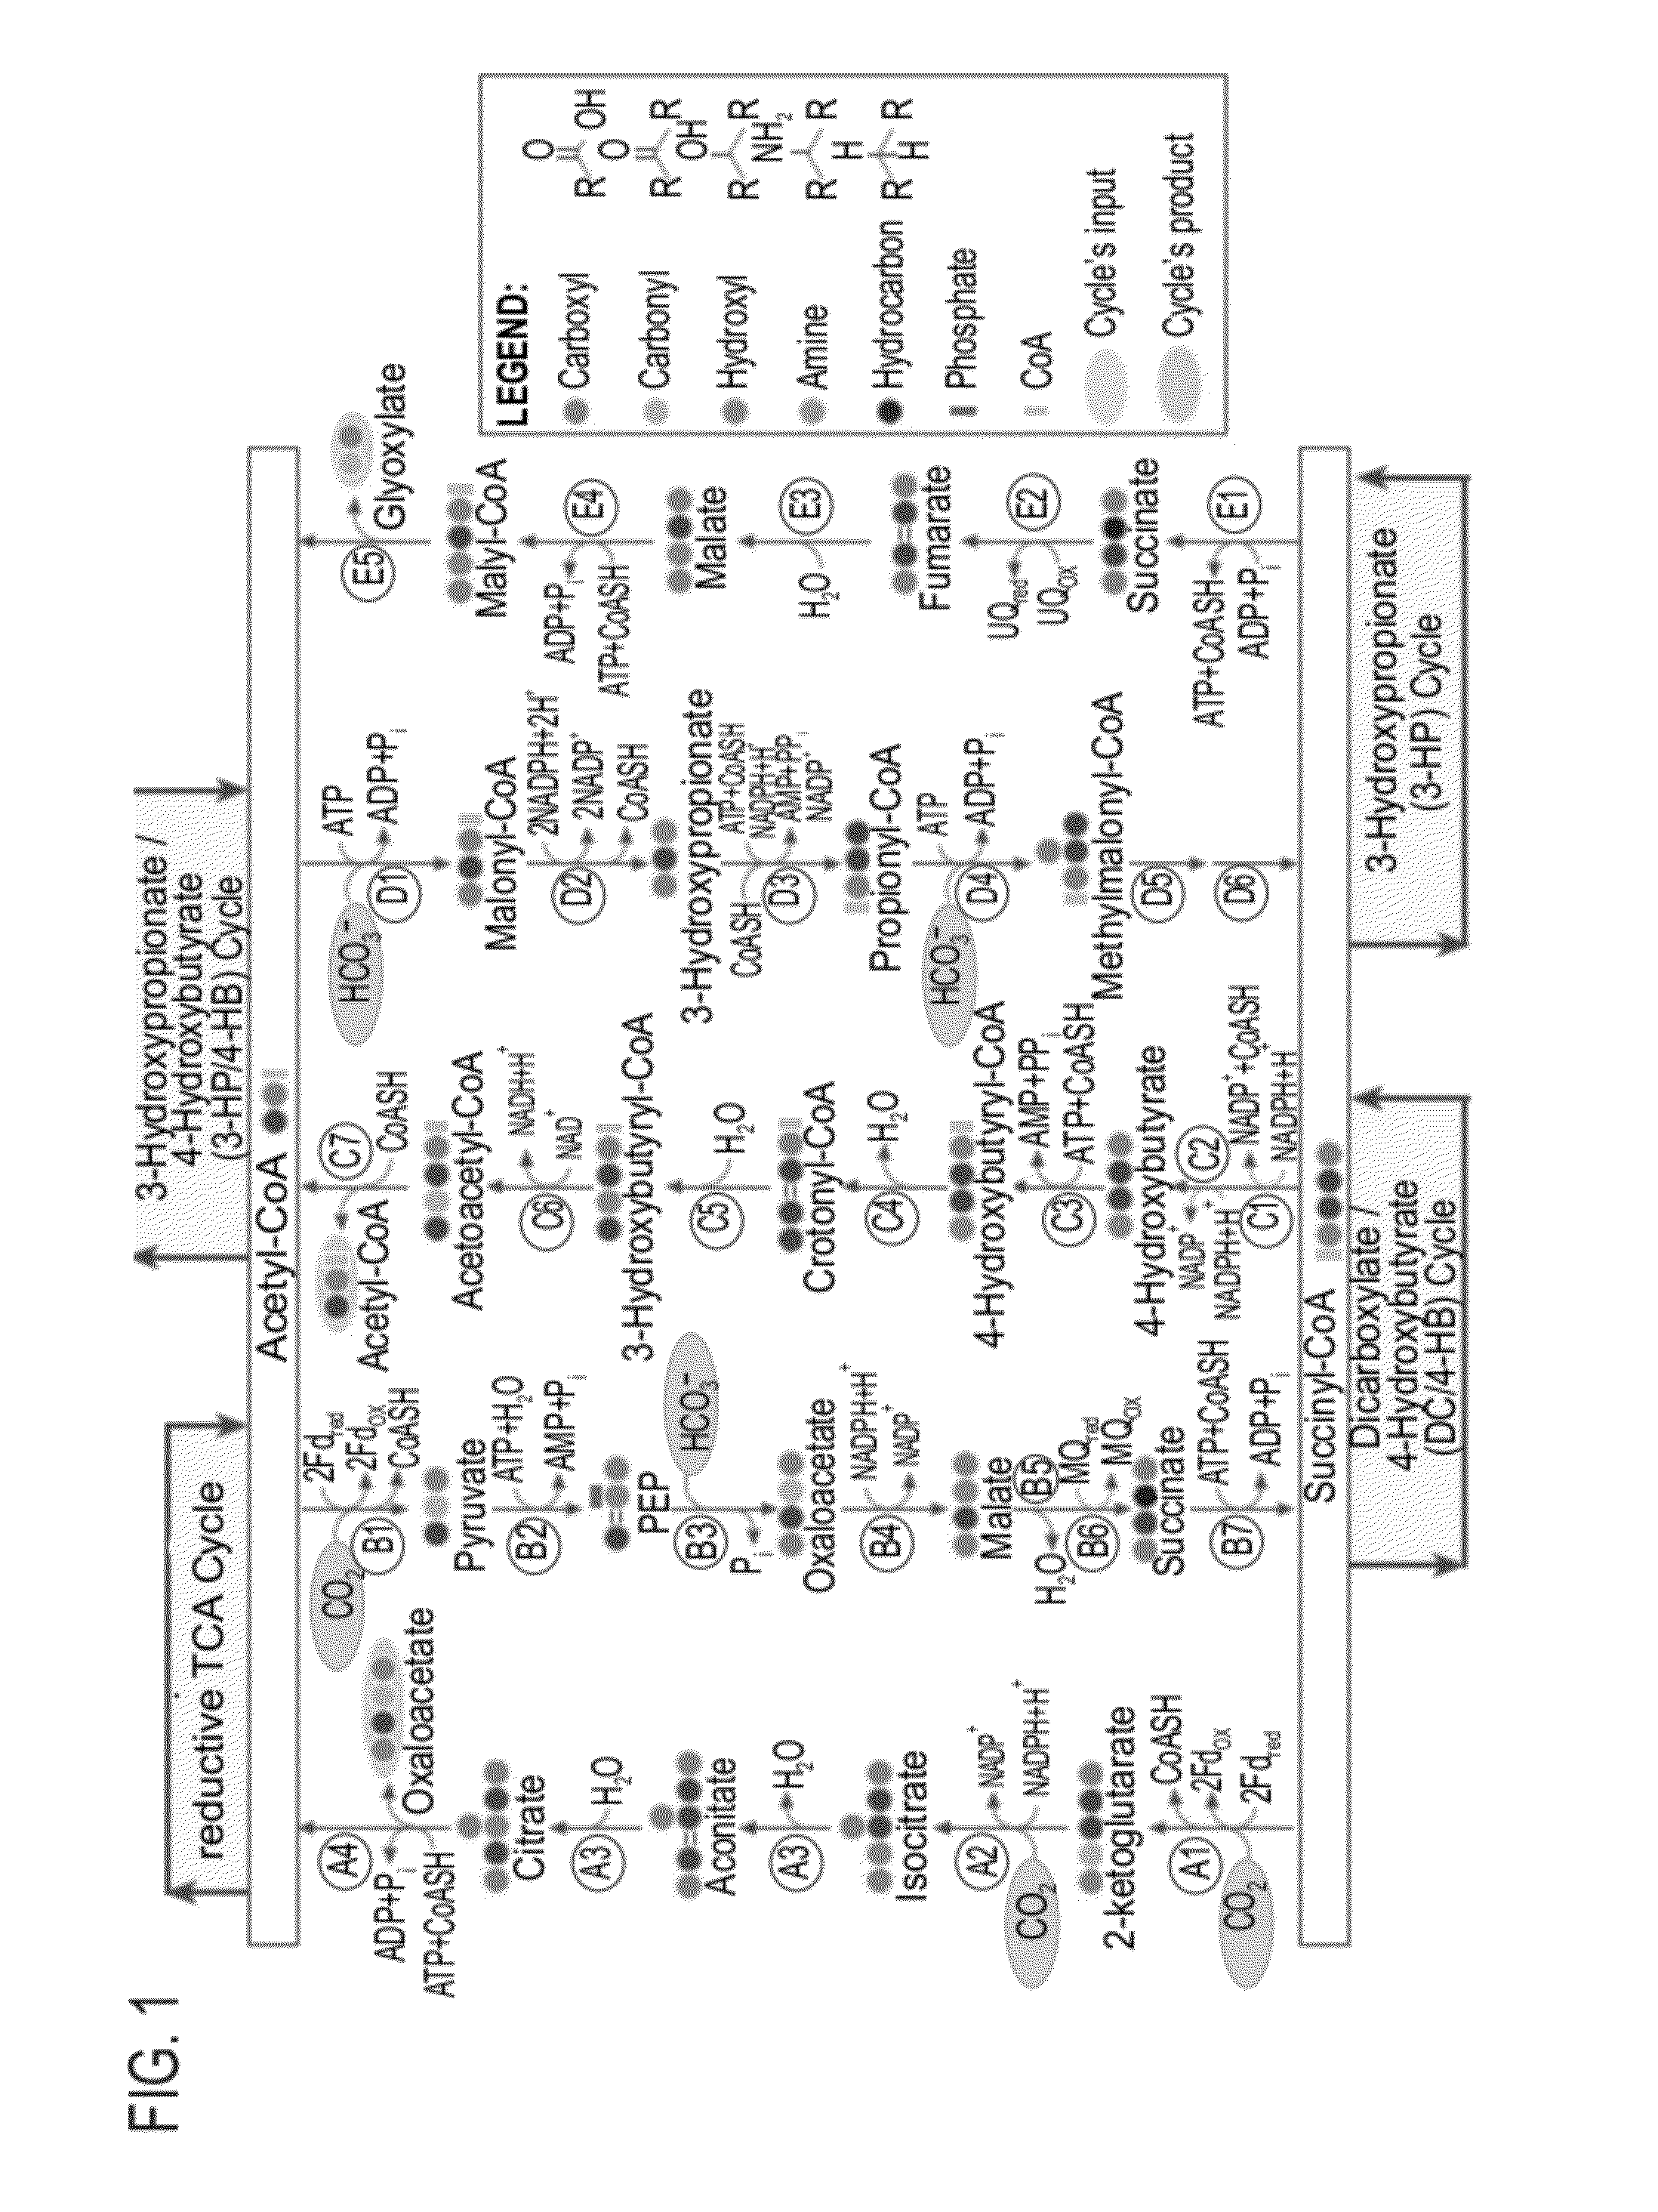 Enzymatic systems for carbon fixation and methods of generating same